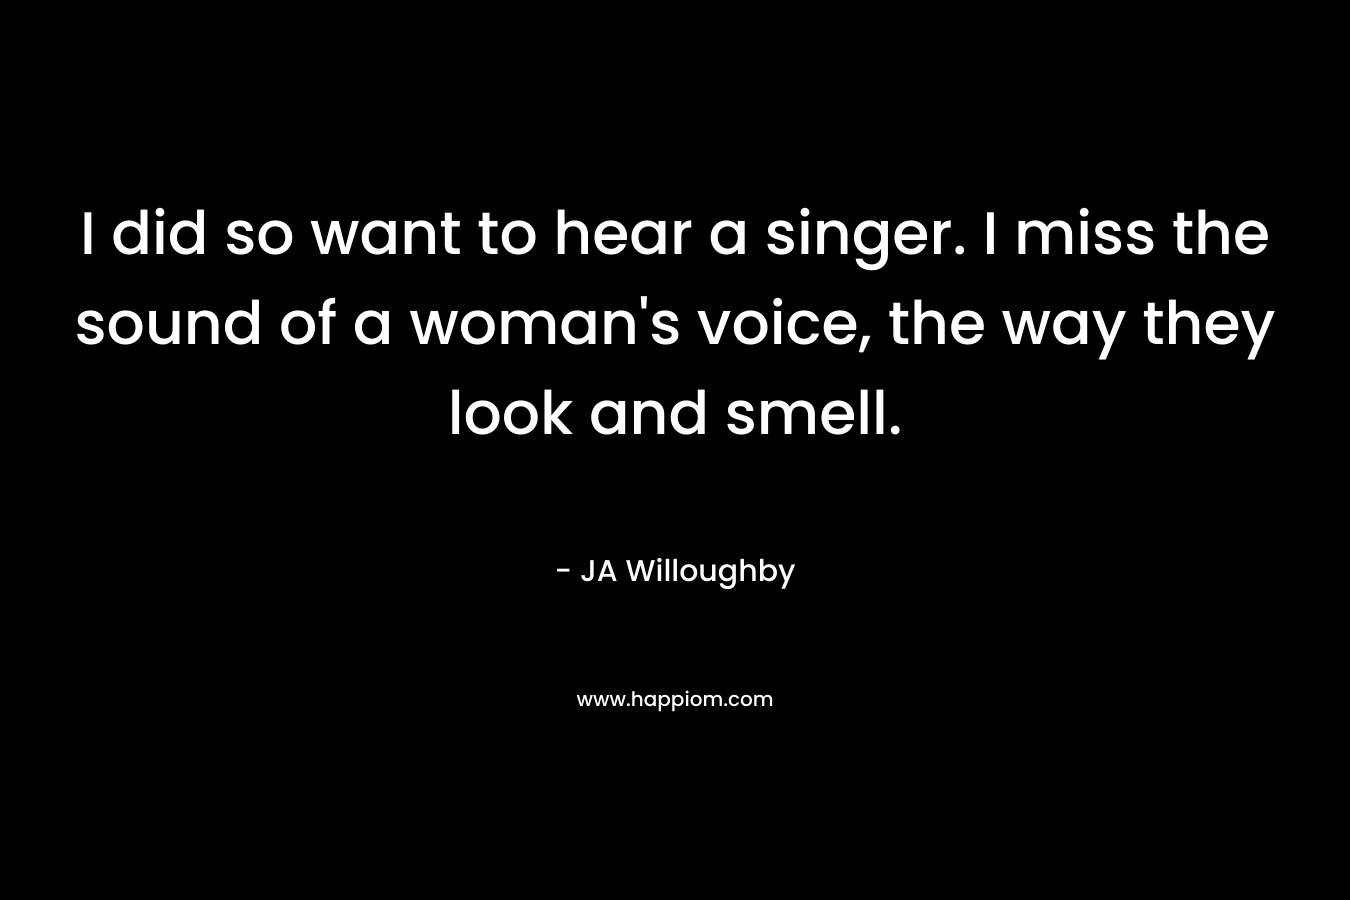 I did so want to hear a singer. I miss the sound of a woman's voice, the way they look and smell.